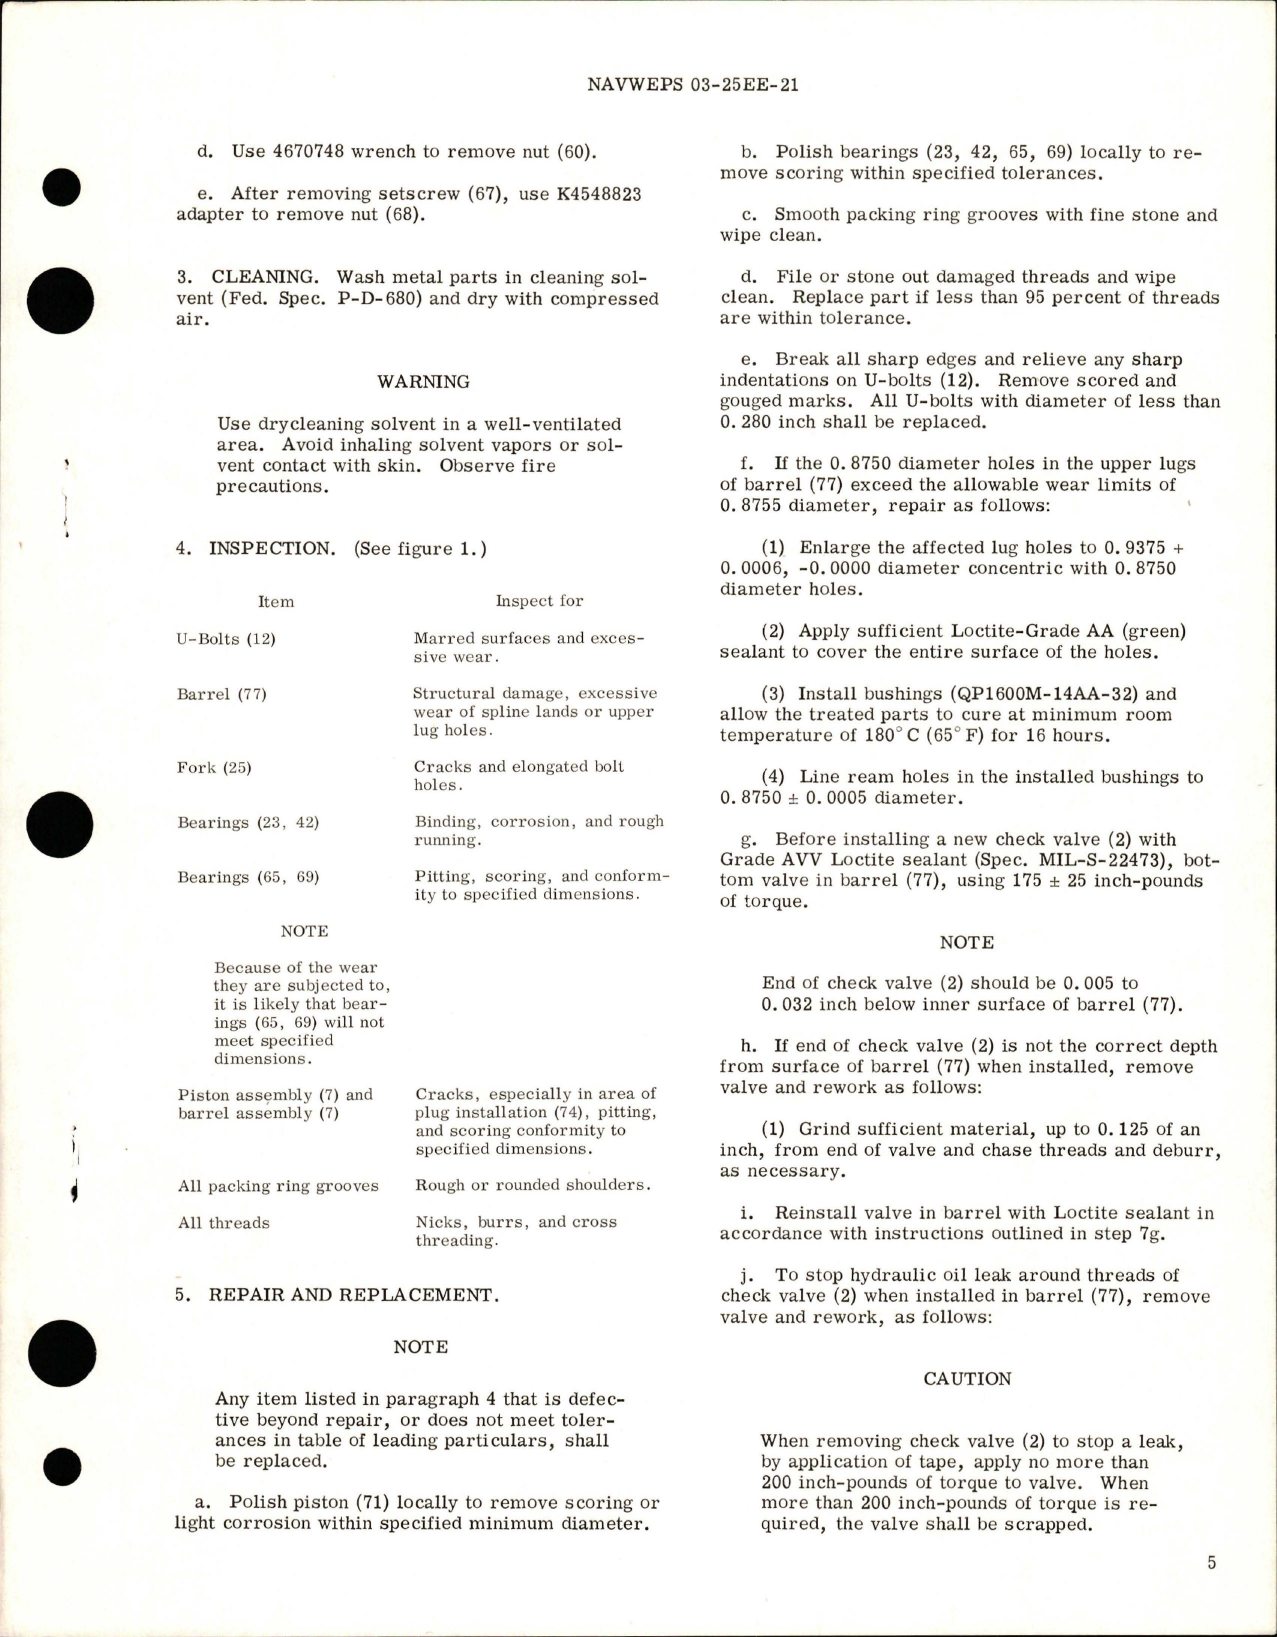 Sample page 5 from AirCorps Library document: Overhaul Instructions with Parts Breakdown for 18-Inch Stroke Nose Landing Gear Strut Assembly - Part 5816175-501